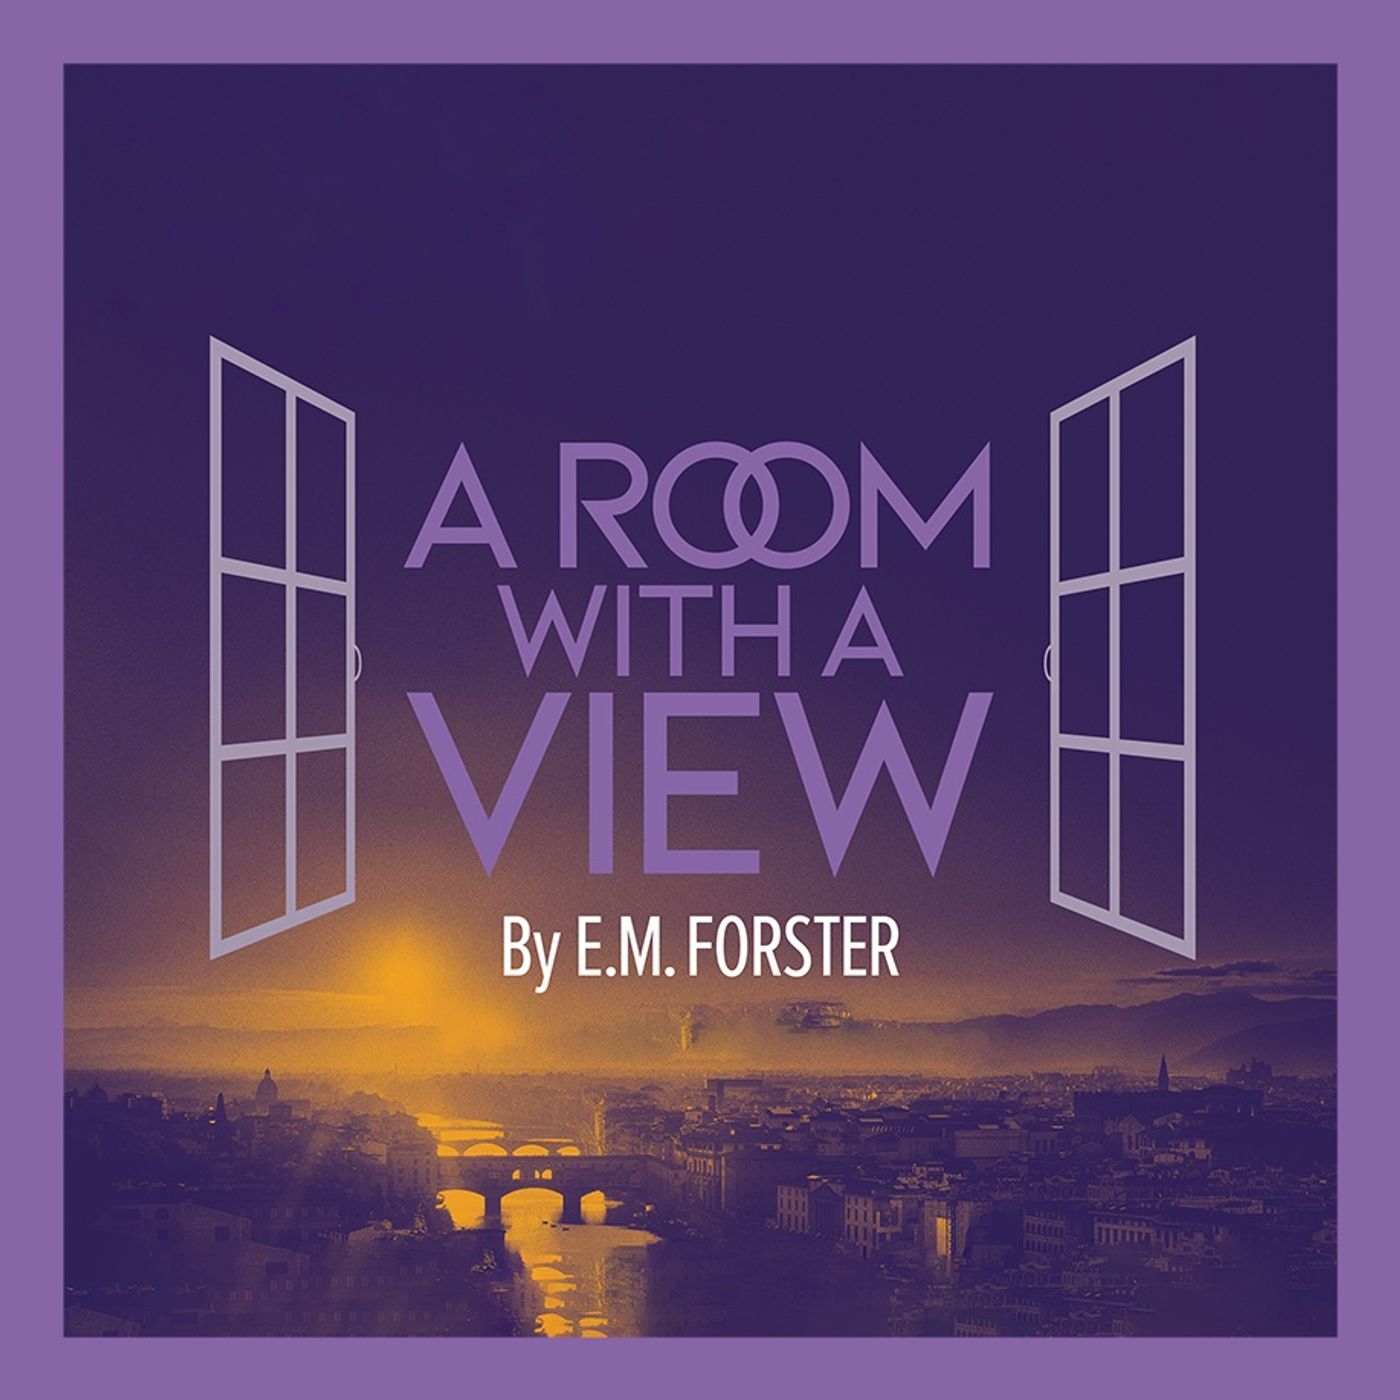 A Room With a View : Chapter 01 - The Bertolini